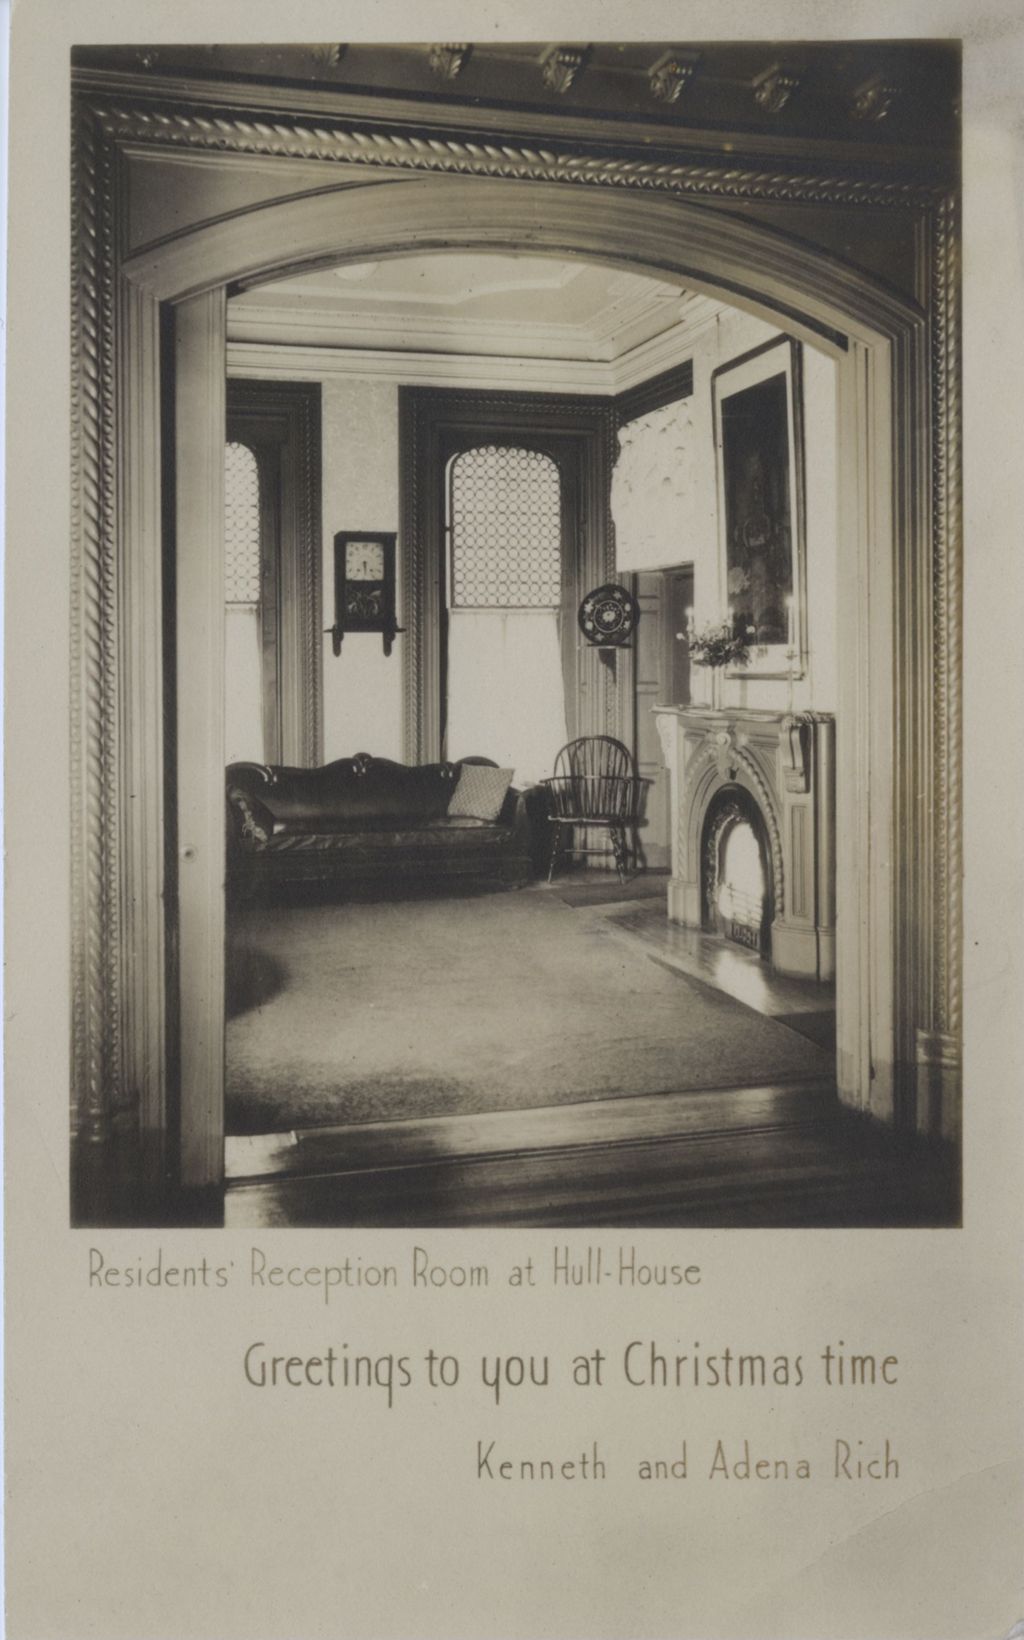 Miniature of Christmas card from Kenneth and Adena Rich with a photo of Residents' Reception Room at Hull-House